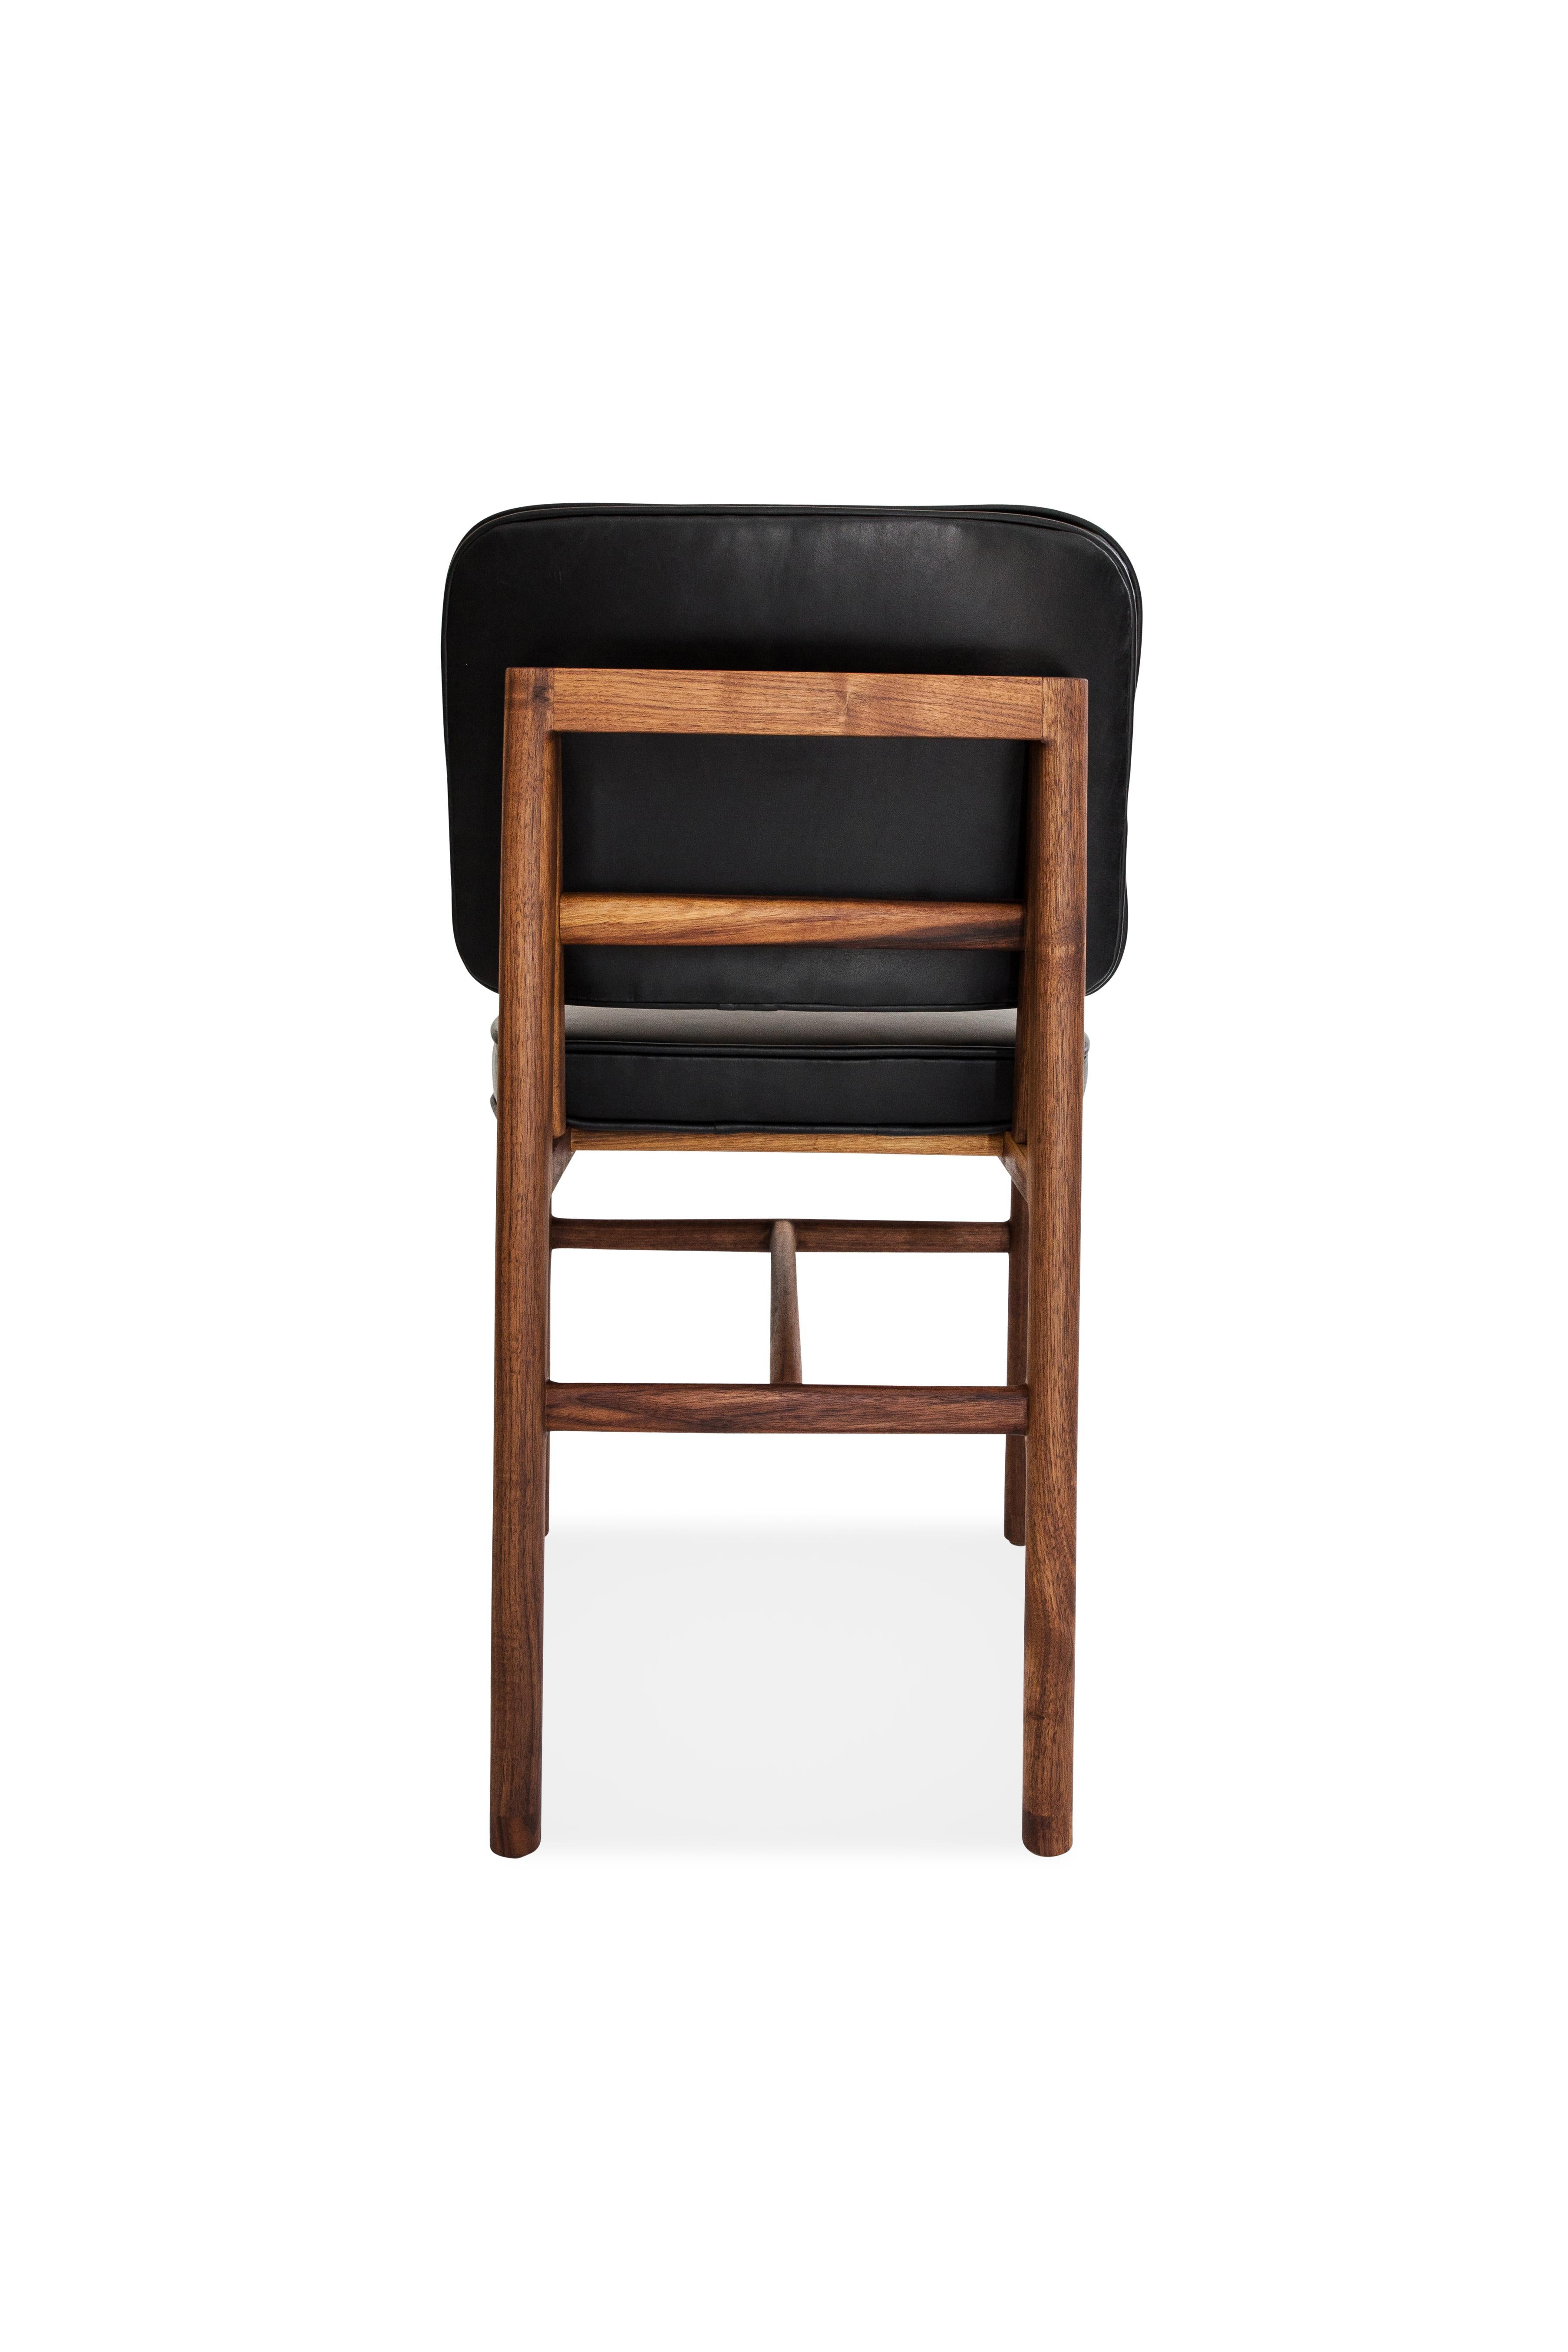 walnut and black dining chairs